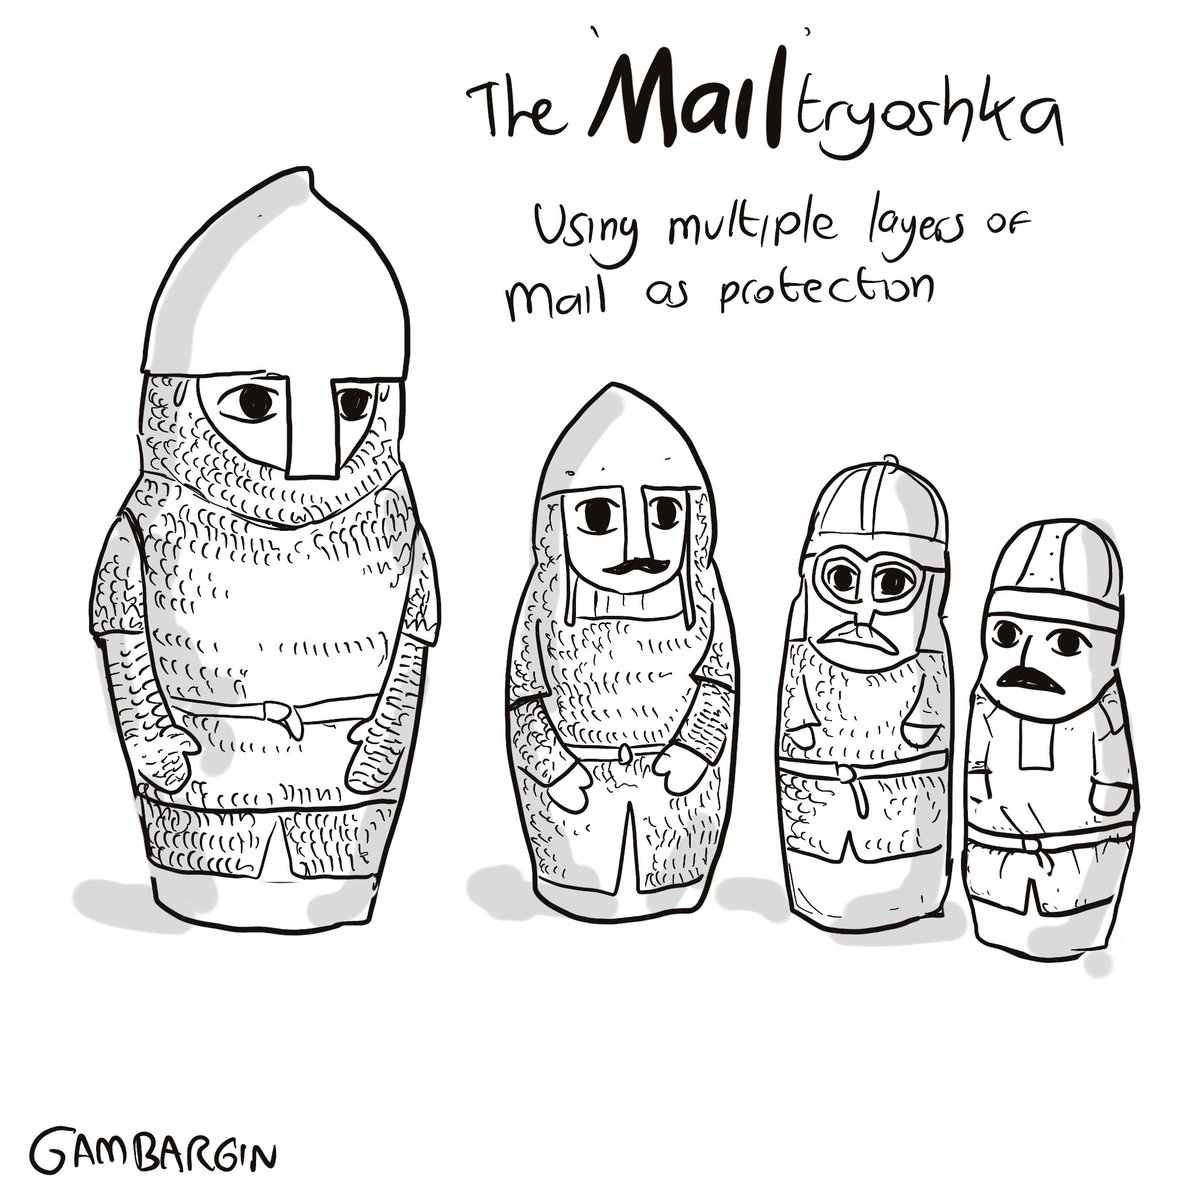 The Mailtryoshka Question Apparently in the medieval period, there were instances of warriors using ‘multiple’ layers of mail as an added protection, as opposed to a single mail shirt/hauberk worn over a garment (padded or otherwise).